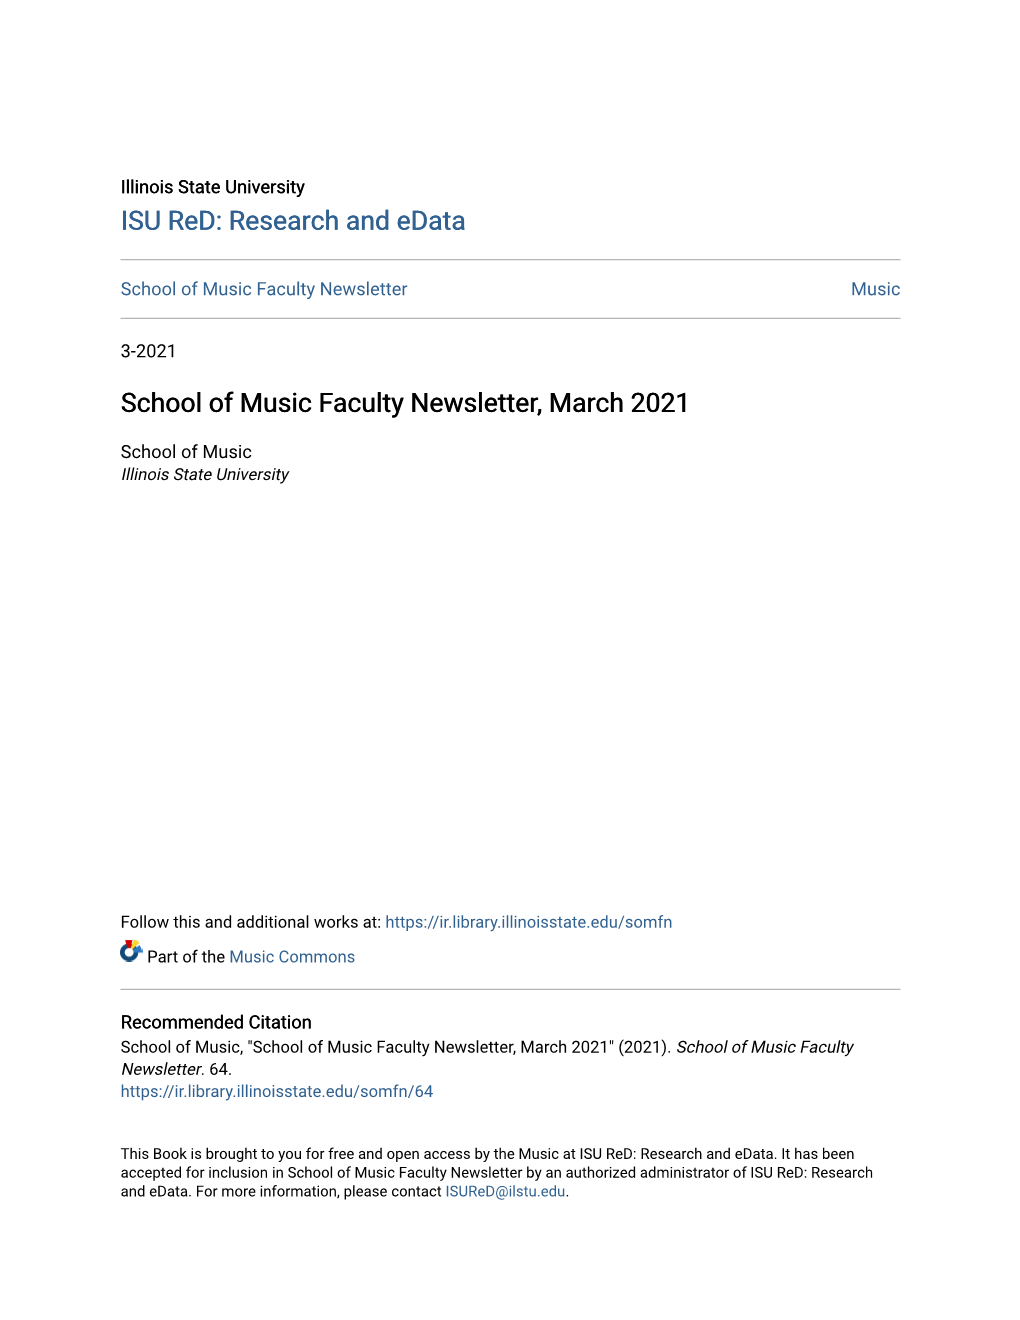 School of Music Faculty Newsletter, March 2021